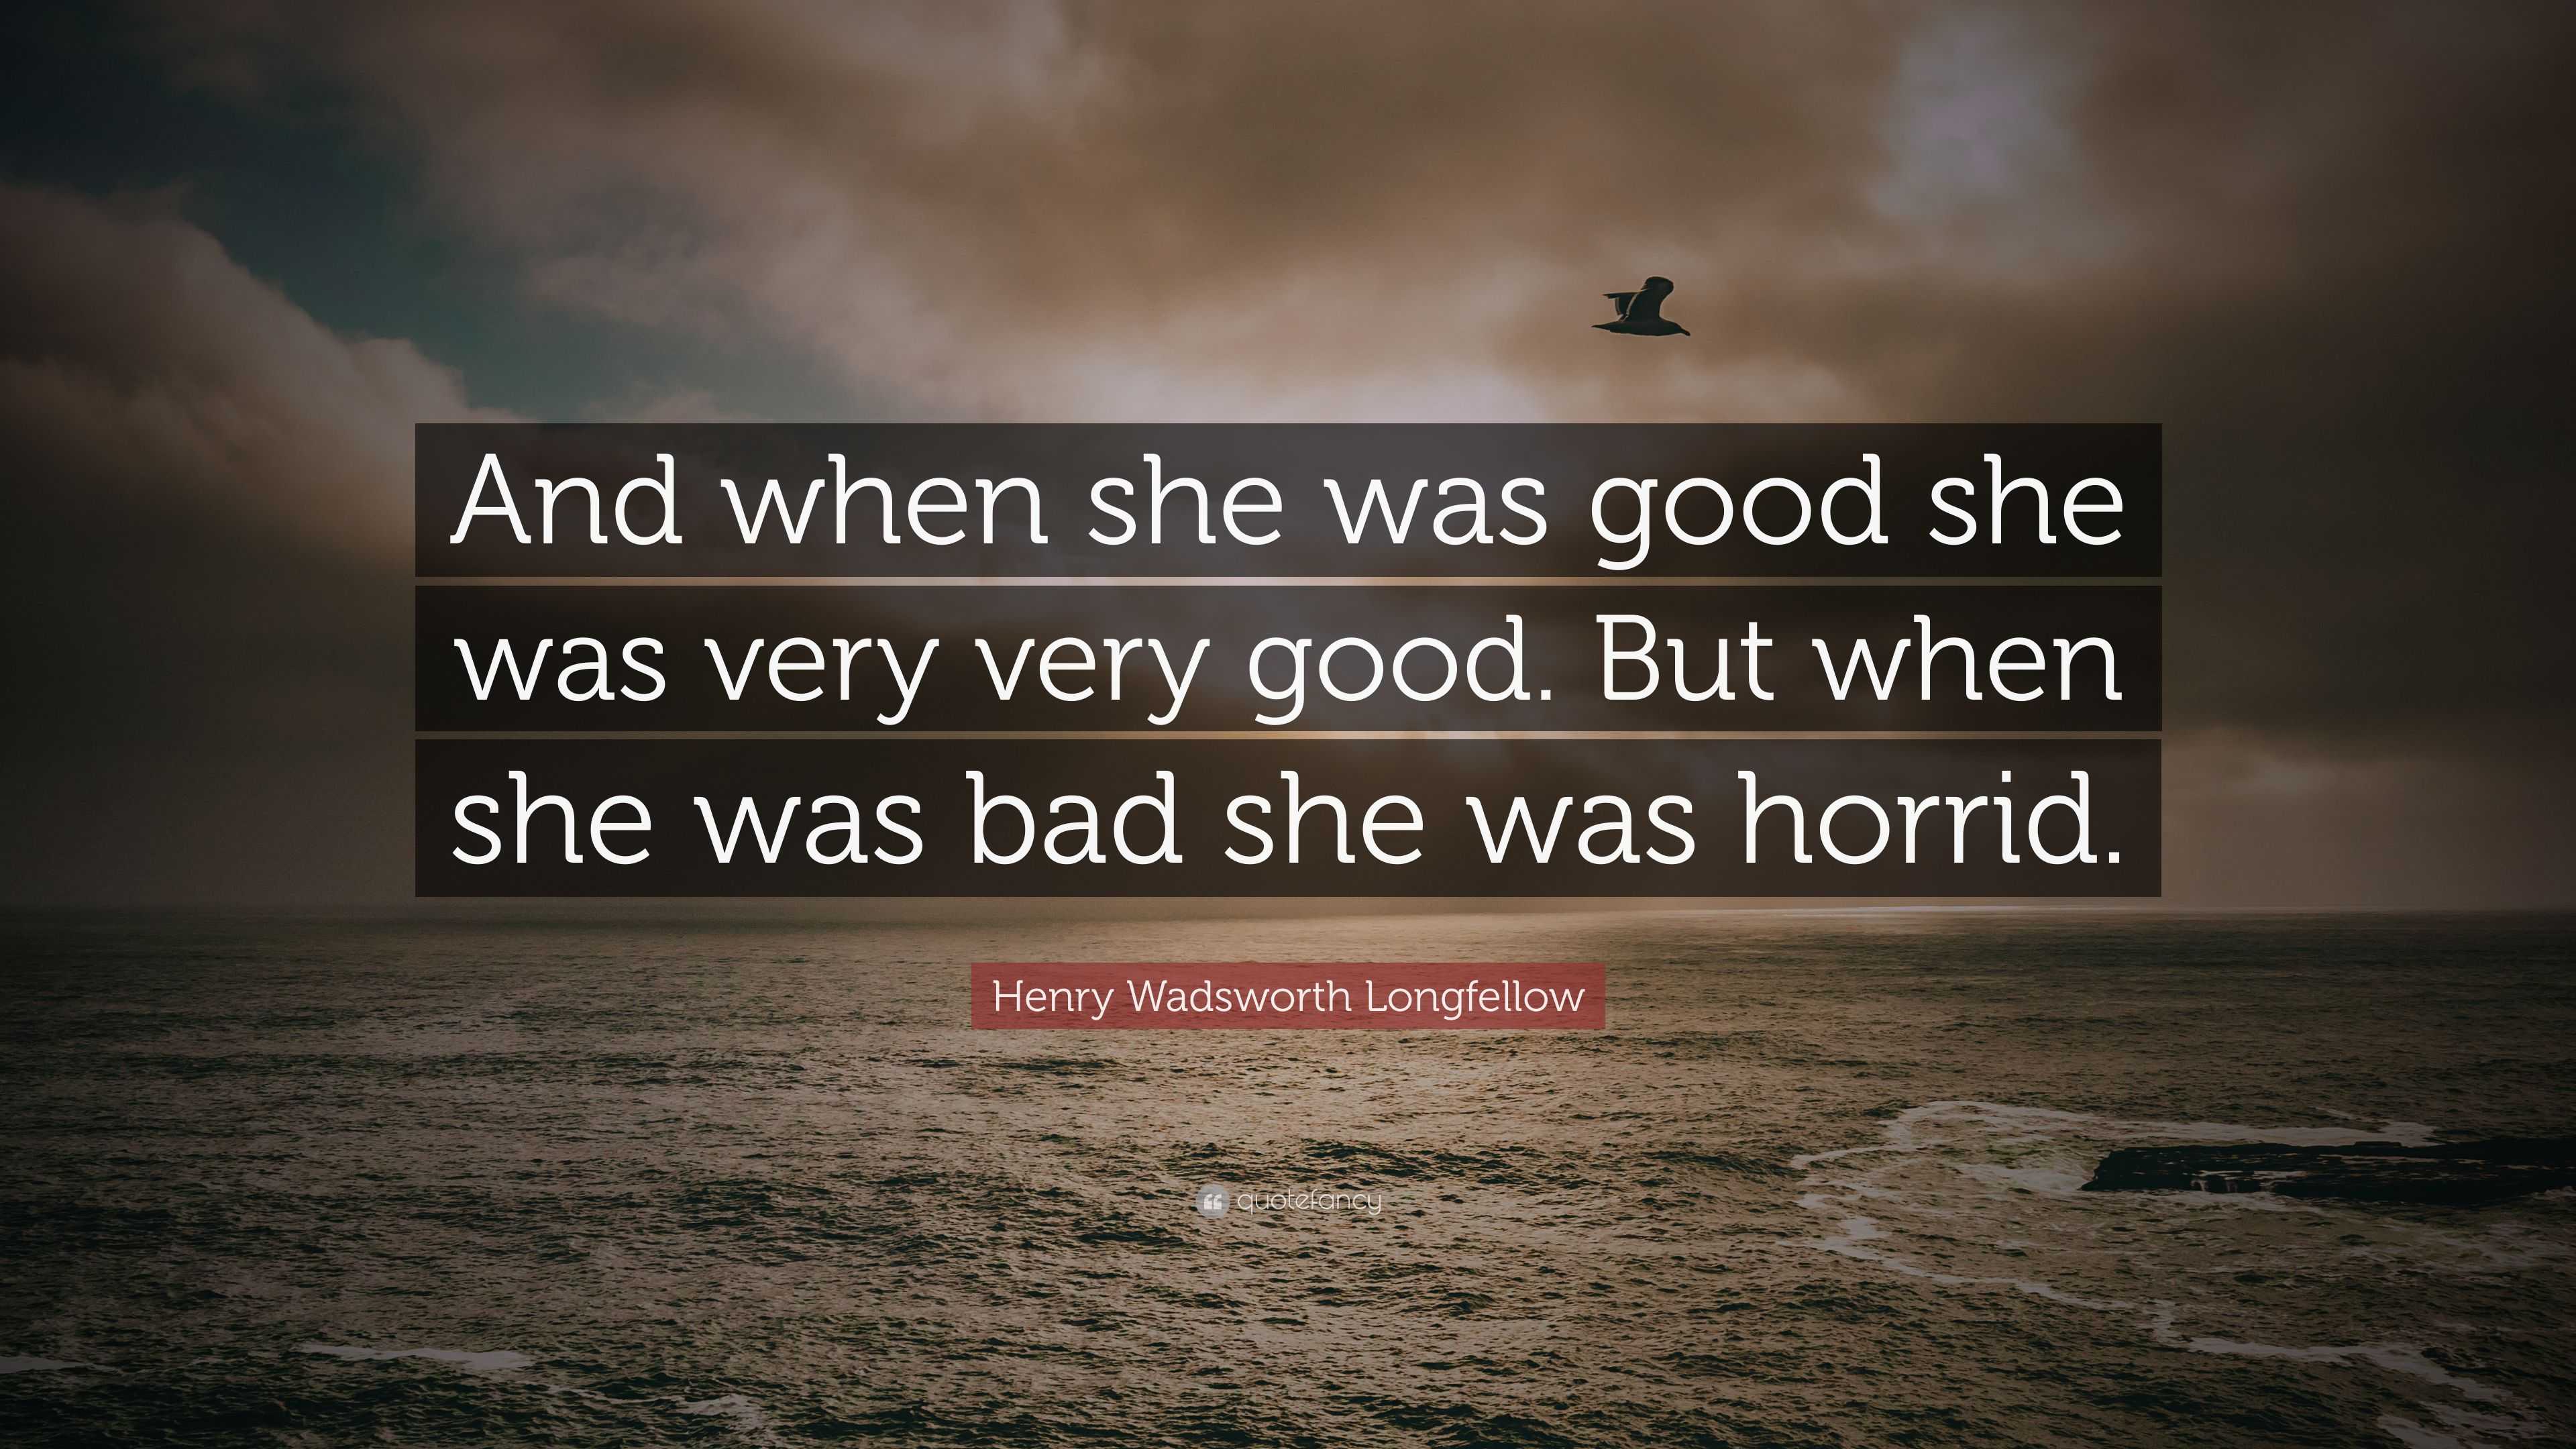 Henry Wadsworth Longfellow Quote “and When She Was Good She Was Very Very Good But When She